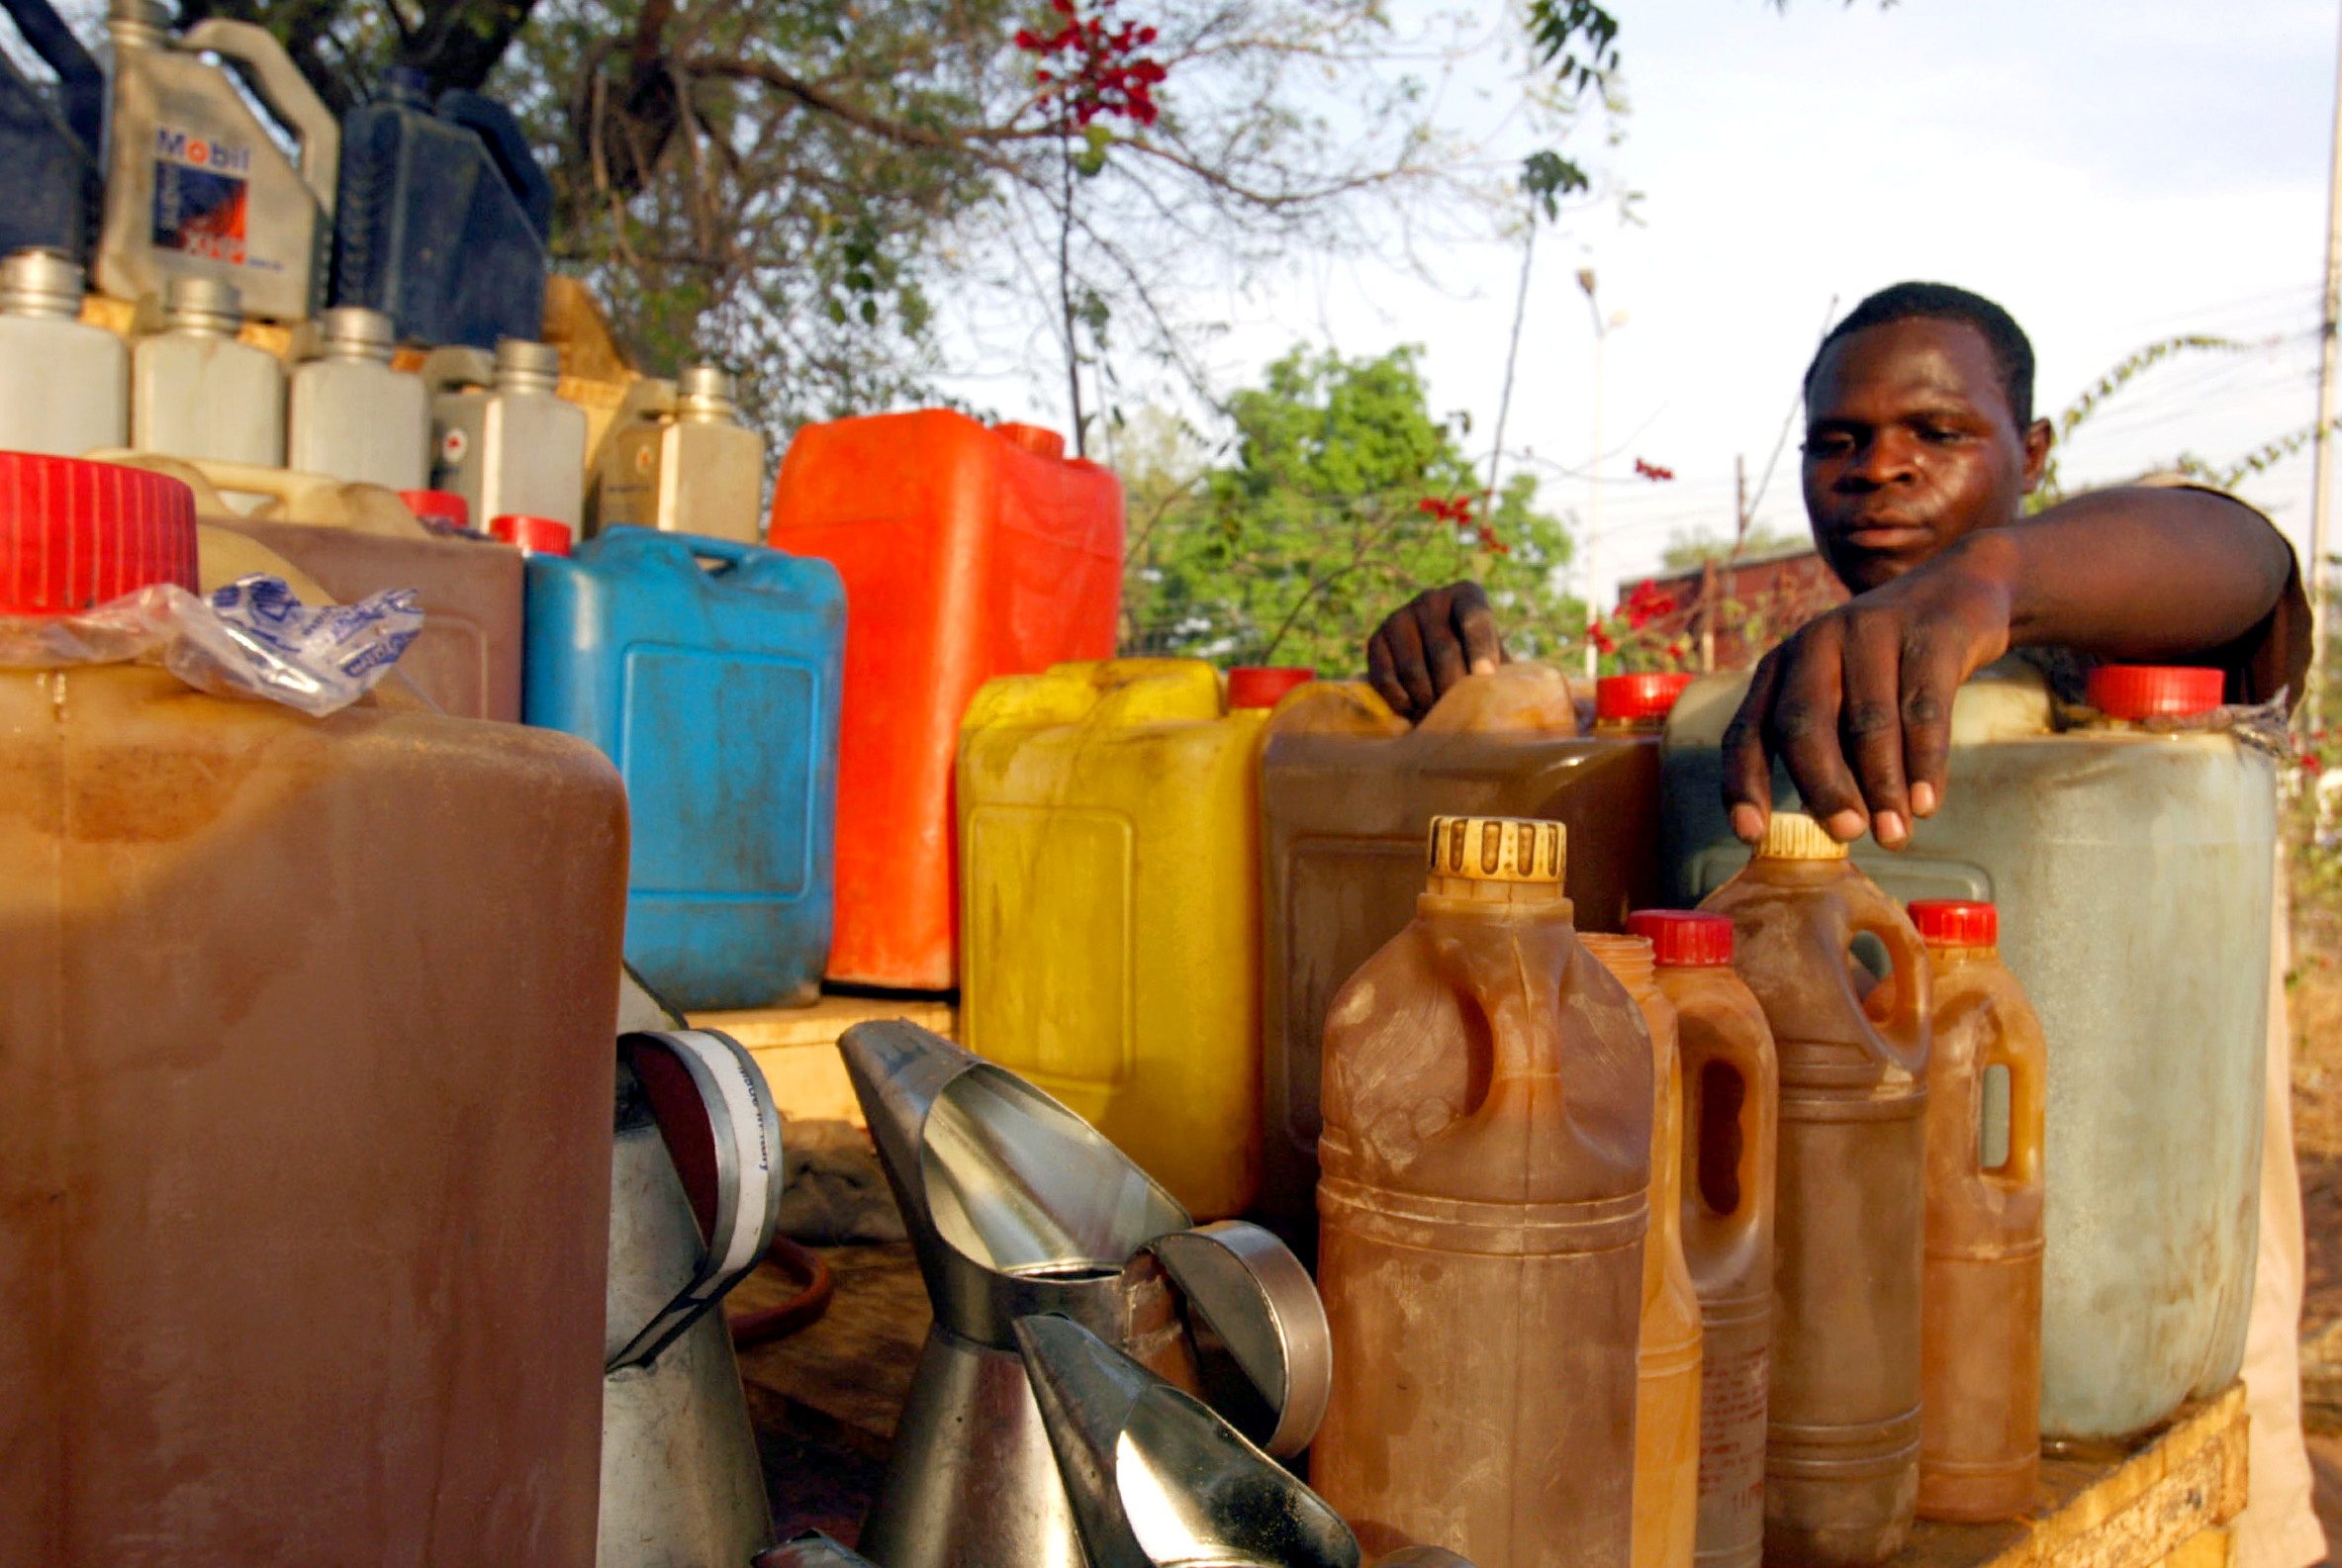 Nigeria should end fuel subsidy, speed reforms, World Bank says